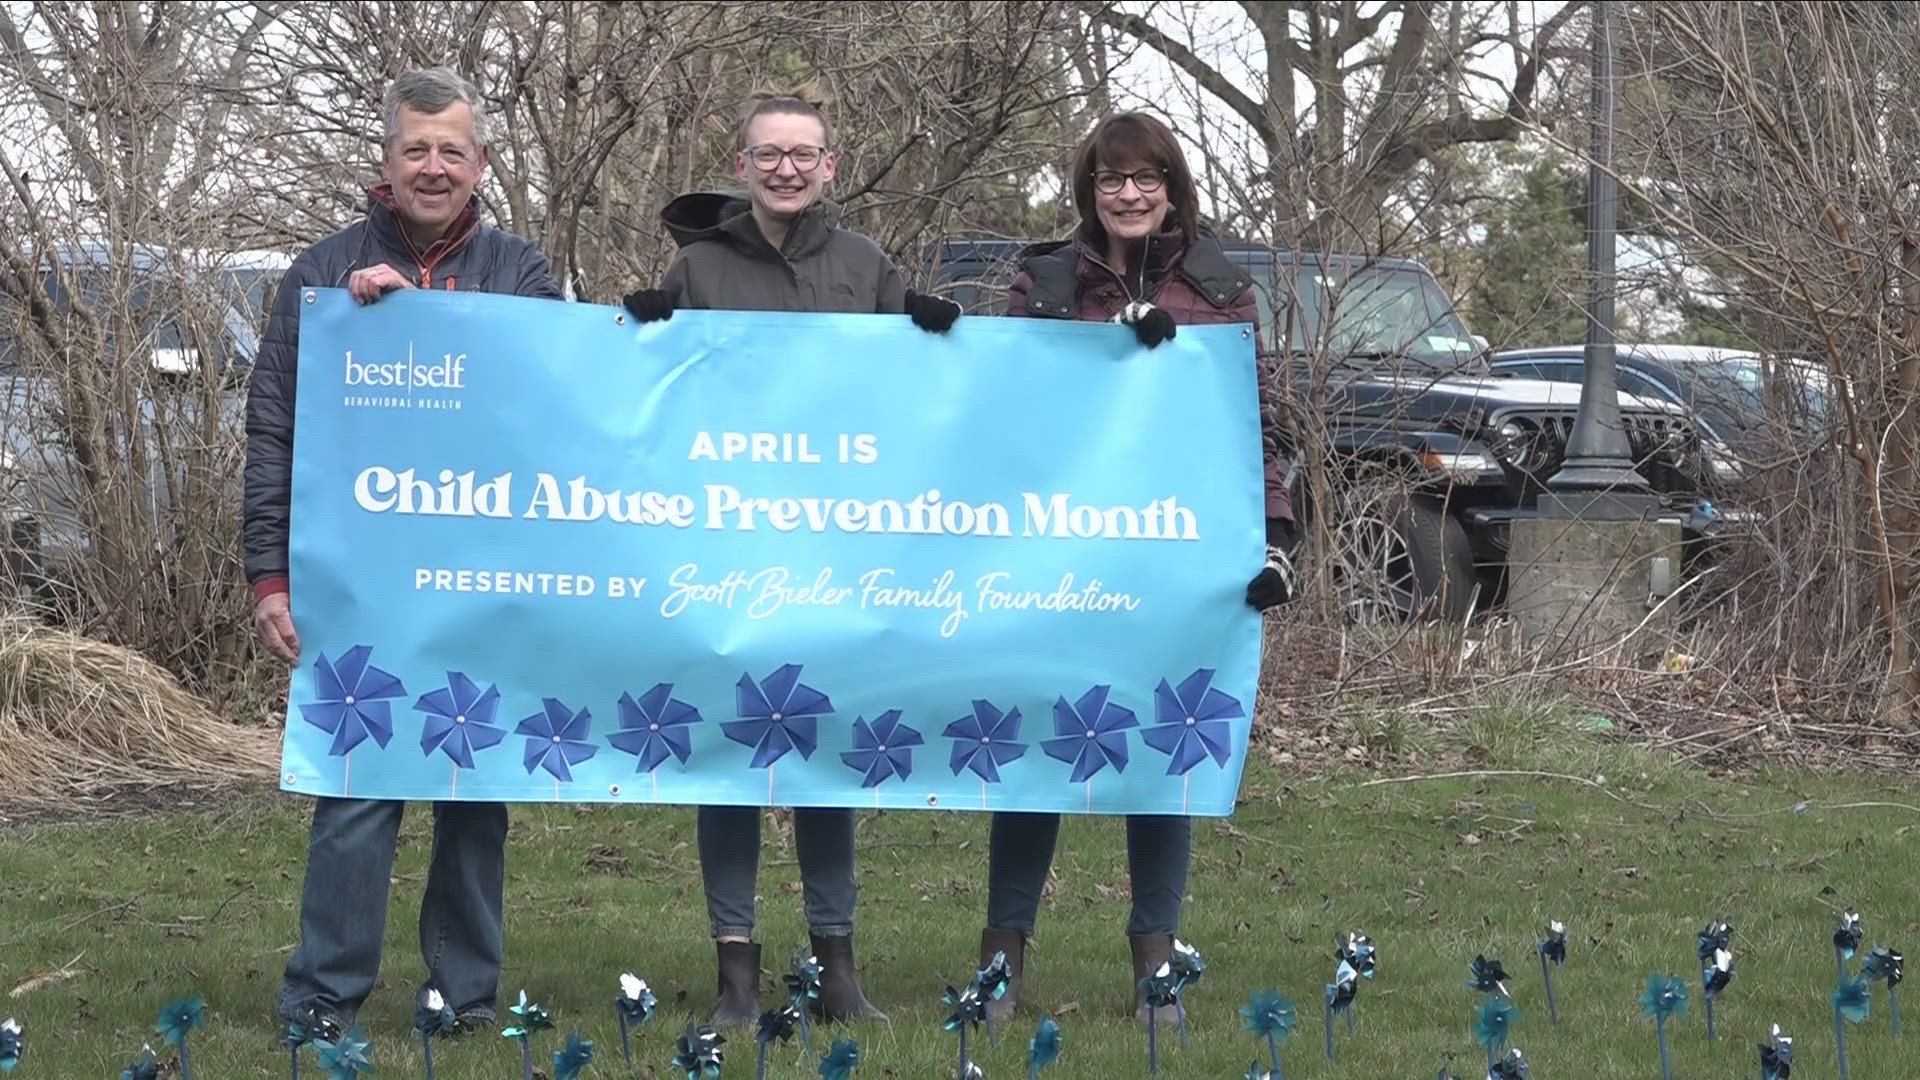 April is Child Abuse Prevention Month, and today Best Self unveiled a powerful display to raise awareness